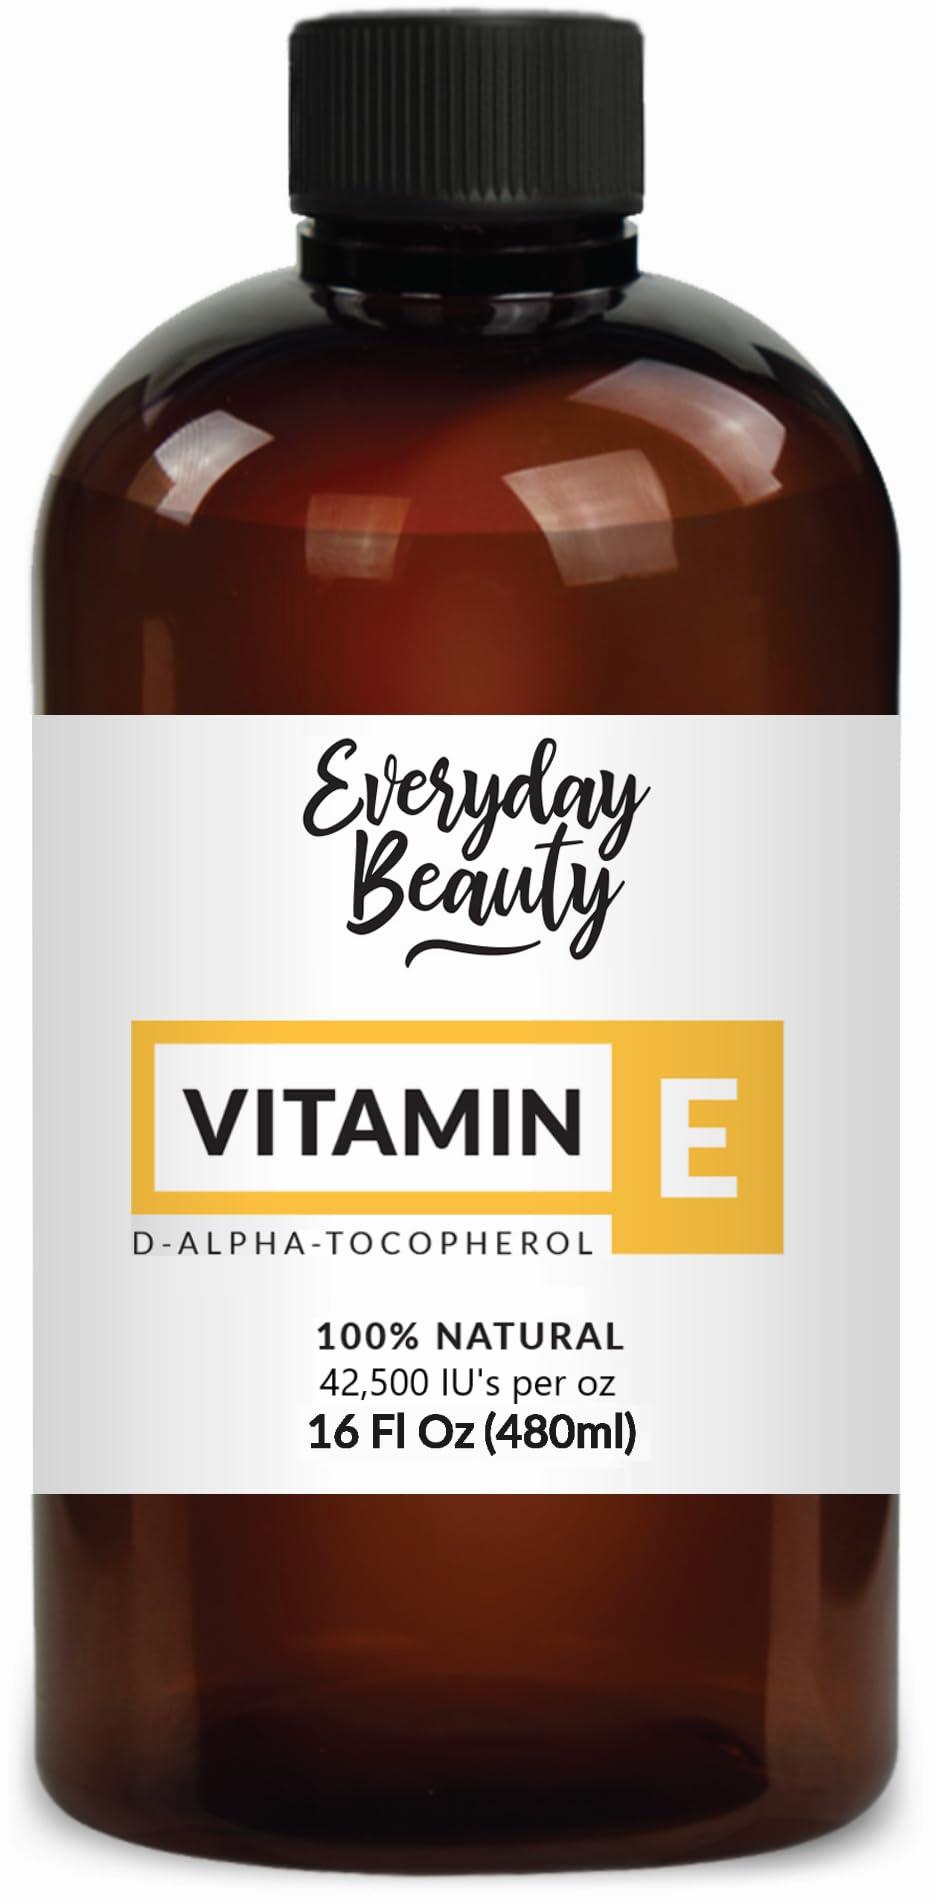 A brown bottle of Vitamin E oil with a black lid.